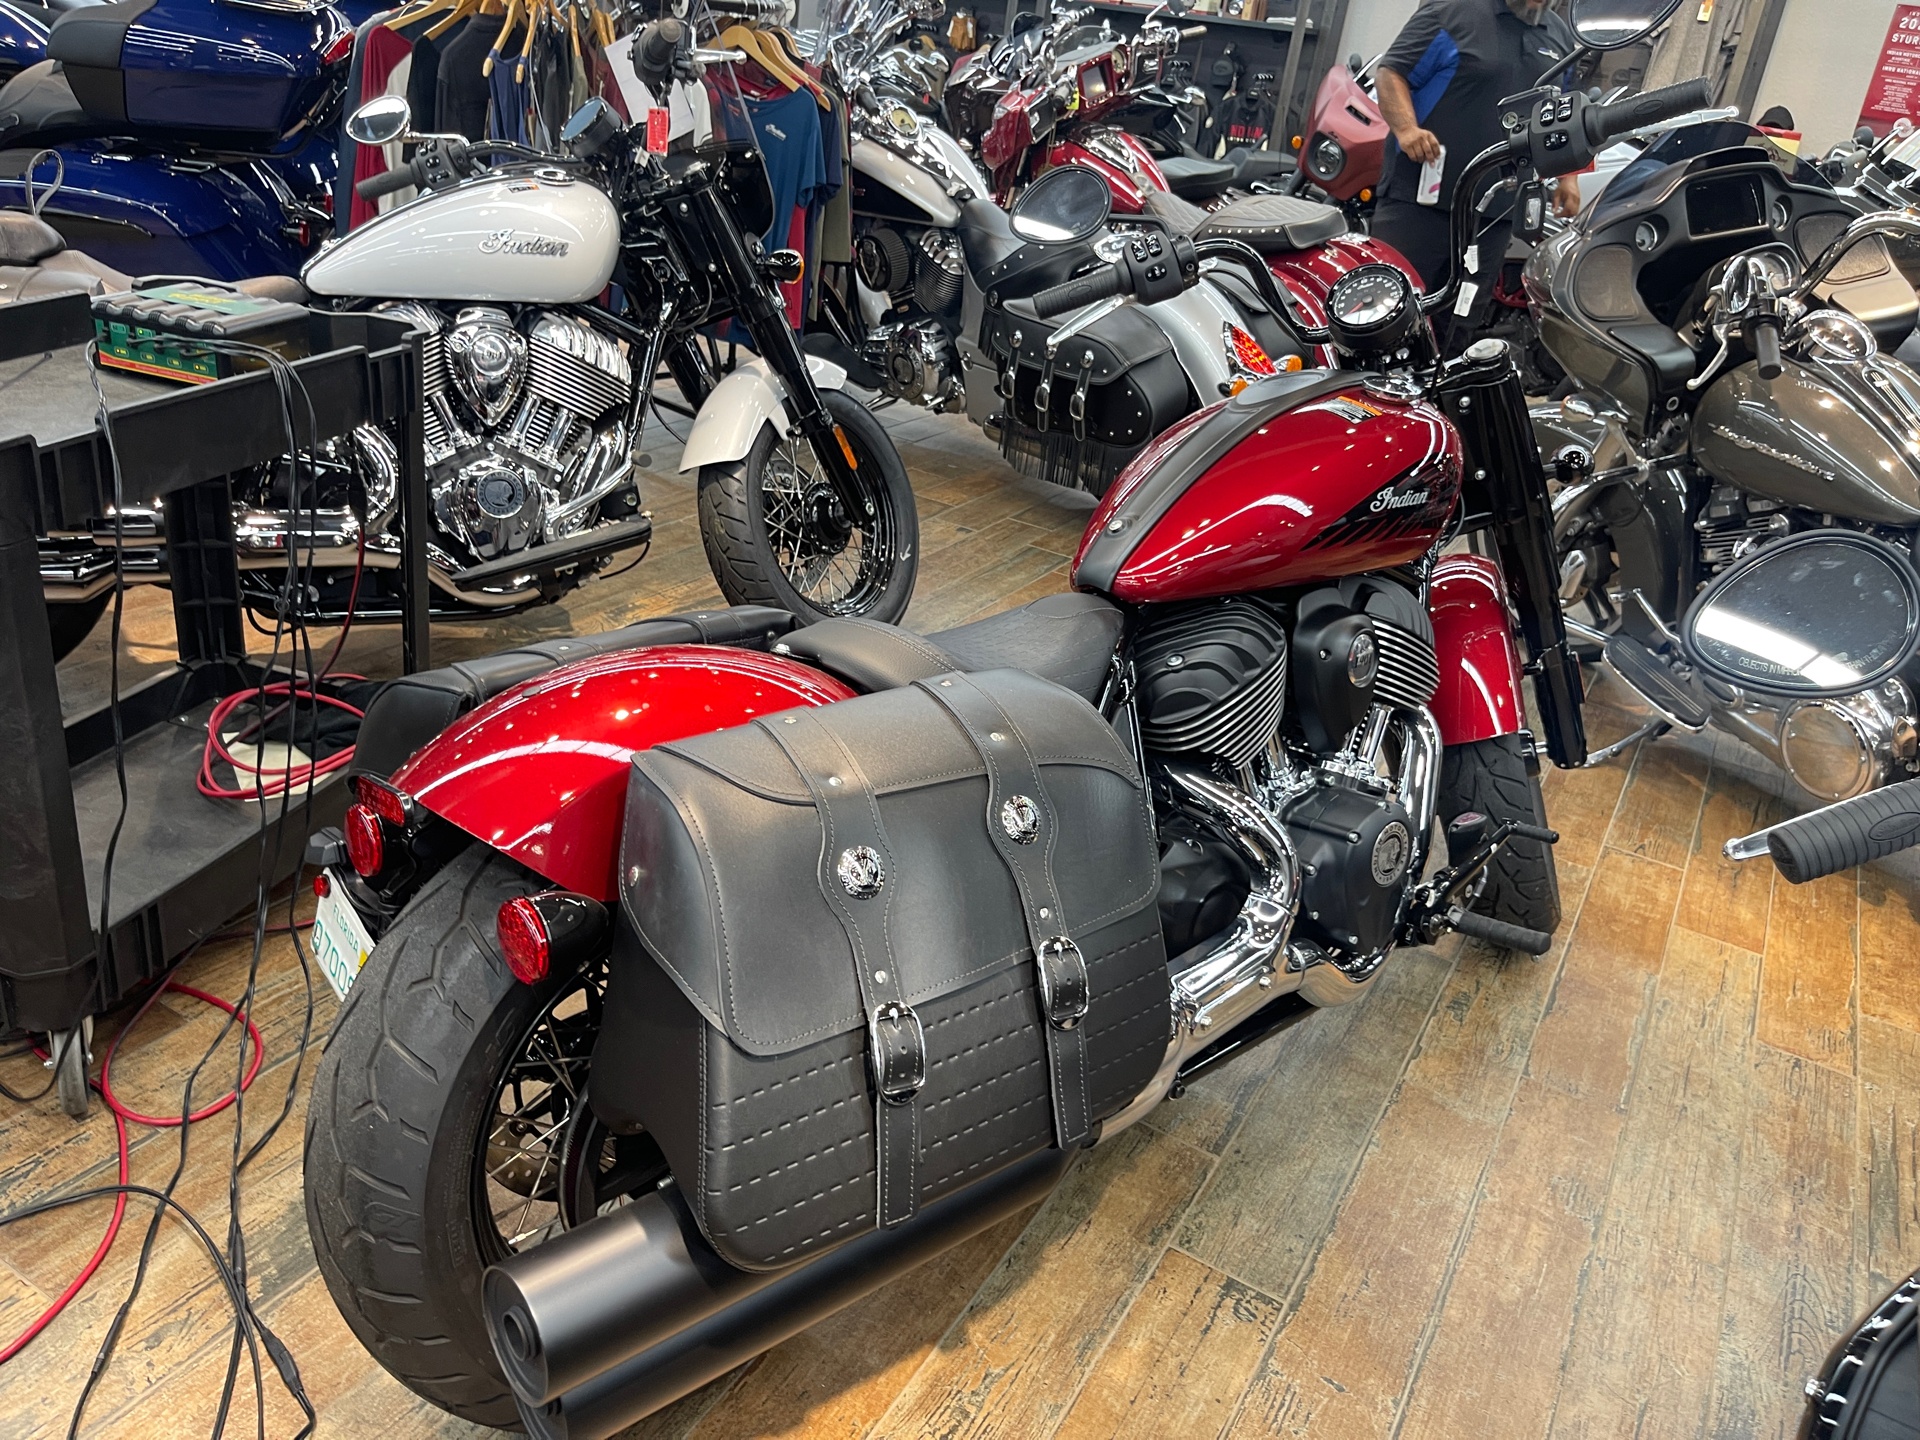 2023 Indian Motorcycle Chief Bobber ABS in Fleming Island, Florida - Photo 4